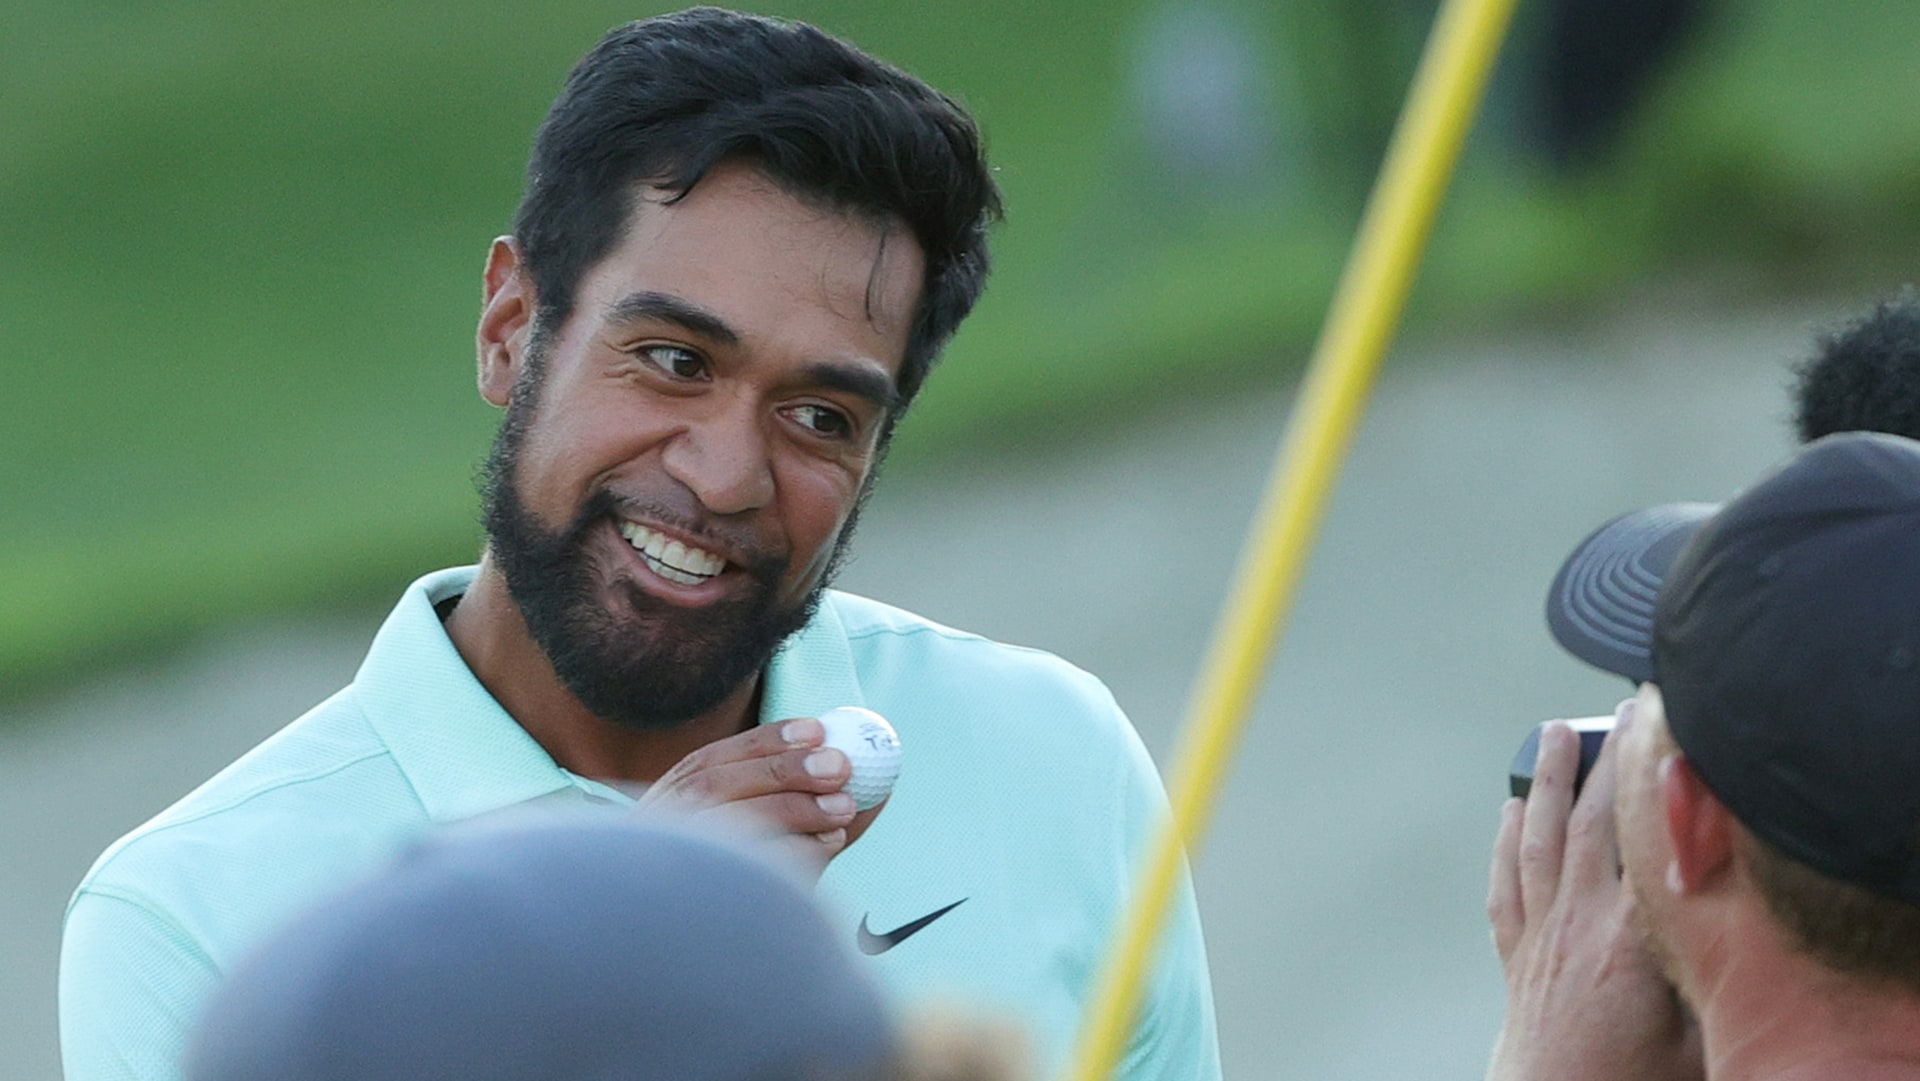 Northern Trust payout: Tony Finau collects $1.71 million, huge FedExCup haul